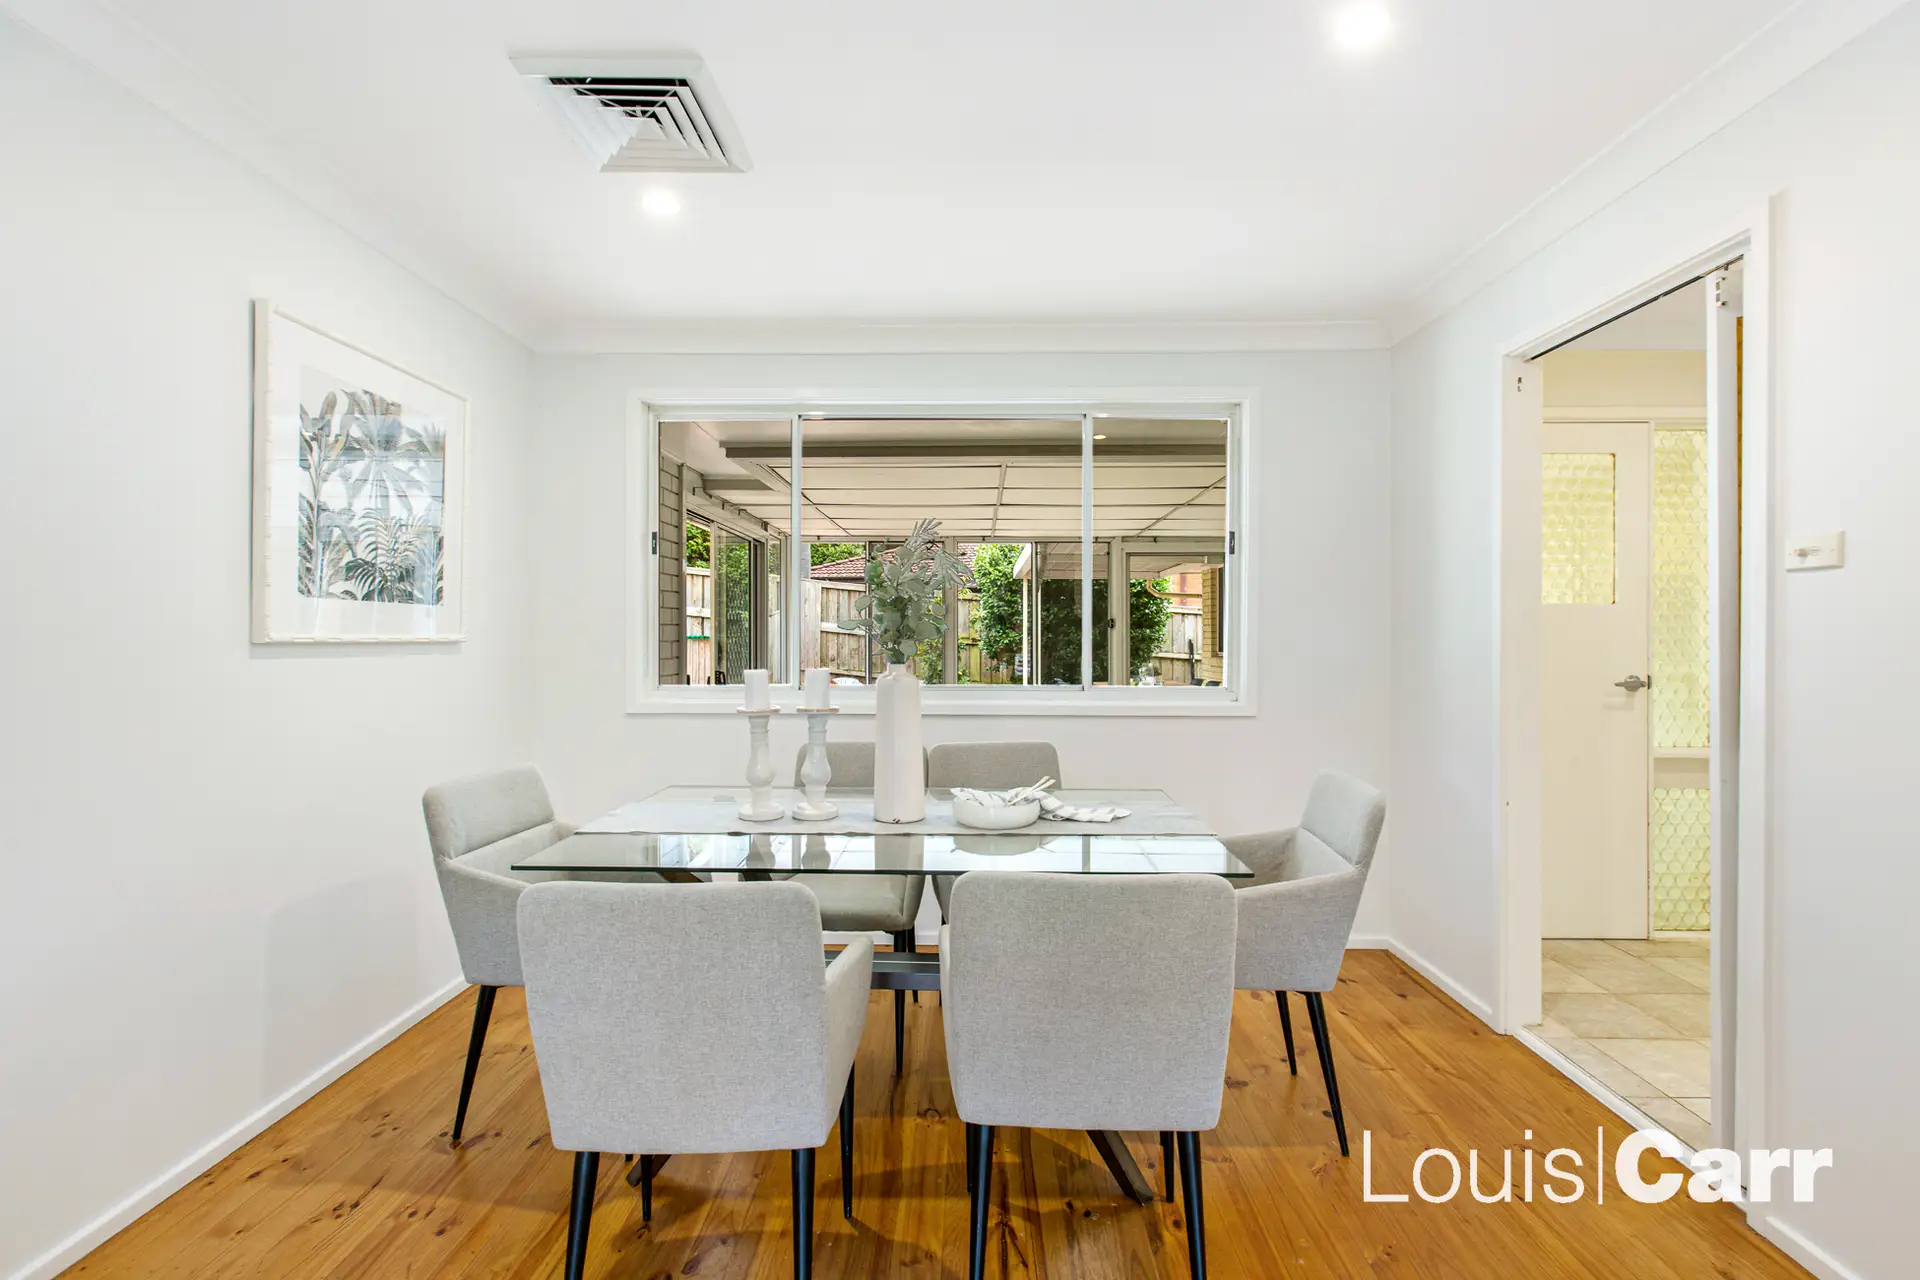 Photo #8: 1 Edward Bennett Drive, Cherrybrook - Sold by Louis Carr Real Estate